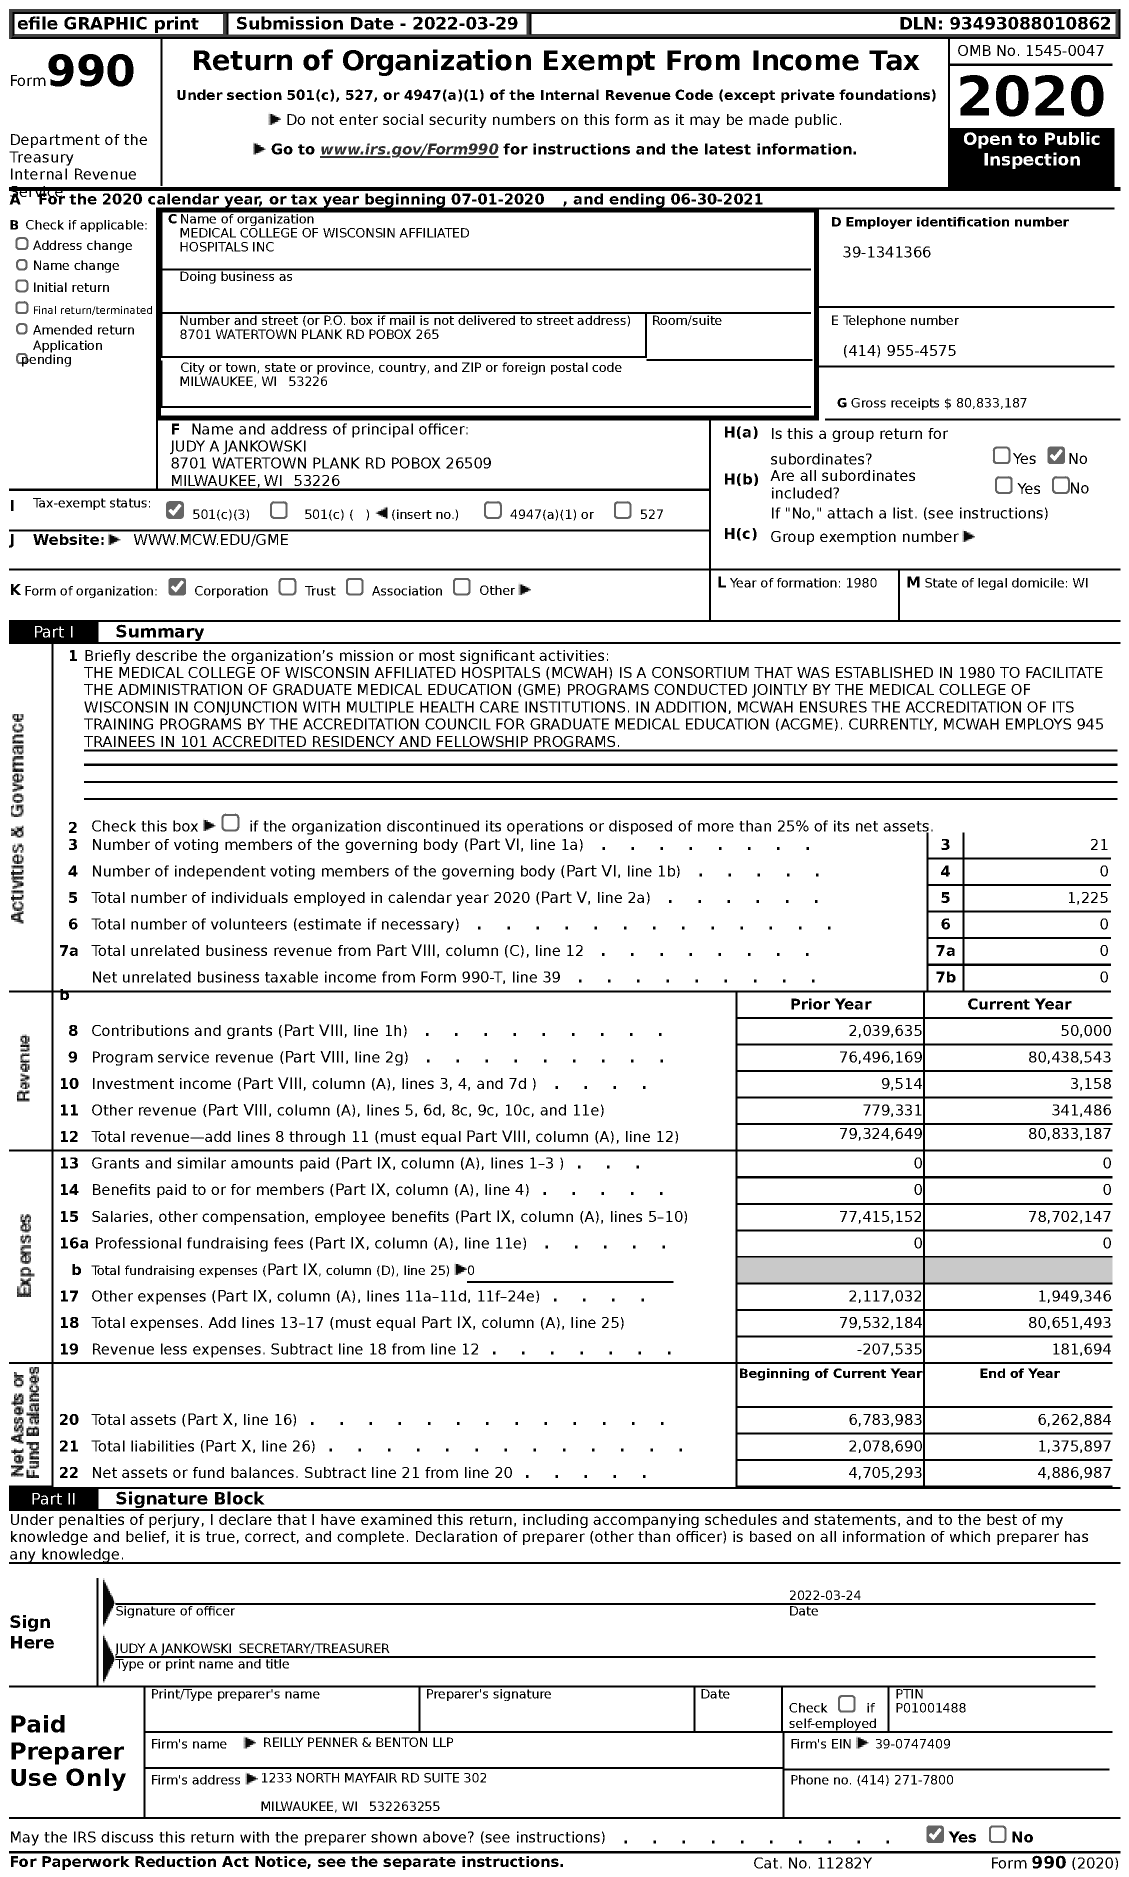 Image of first page of 2020 Form 990 for Medical College of WISCONSIN (MCW)